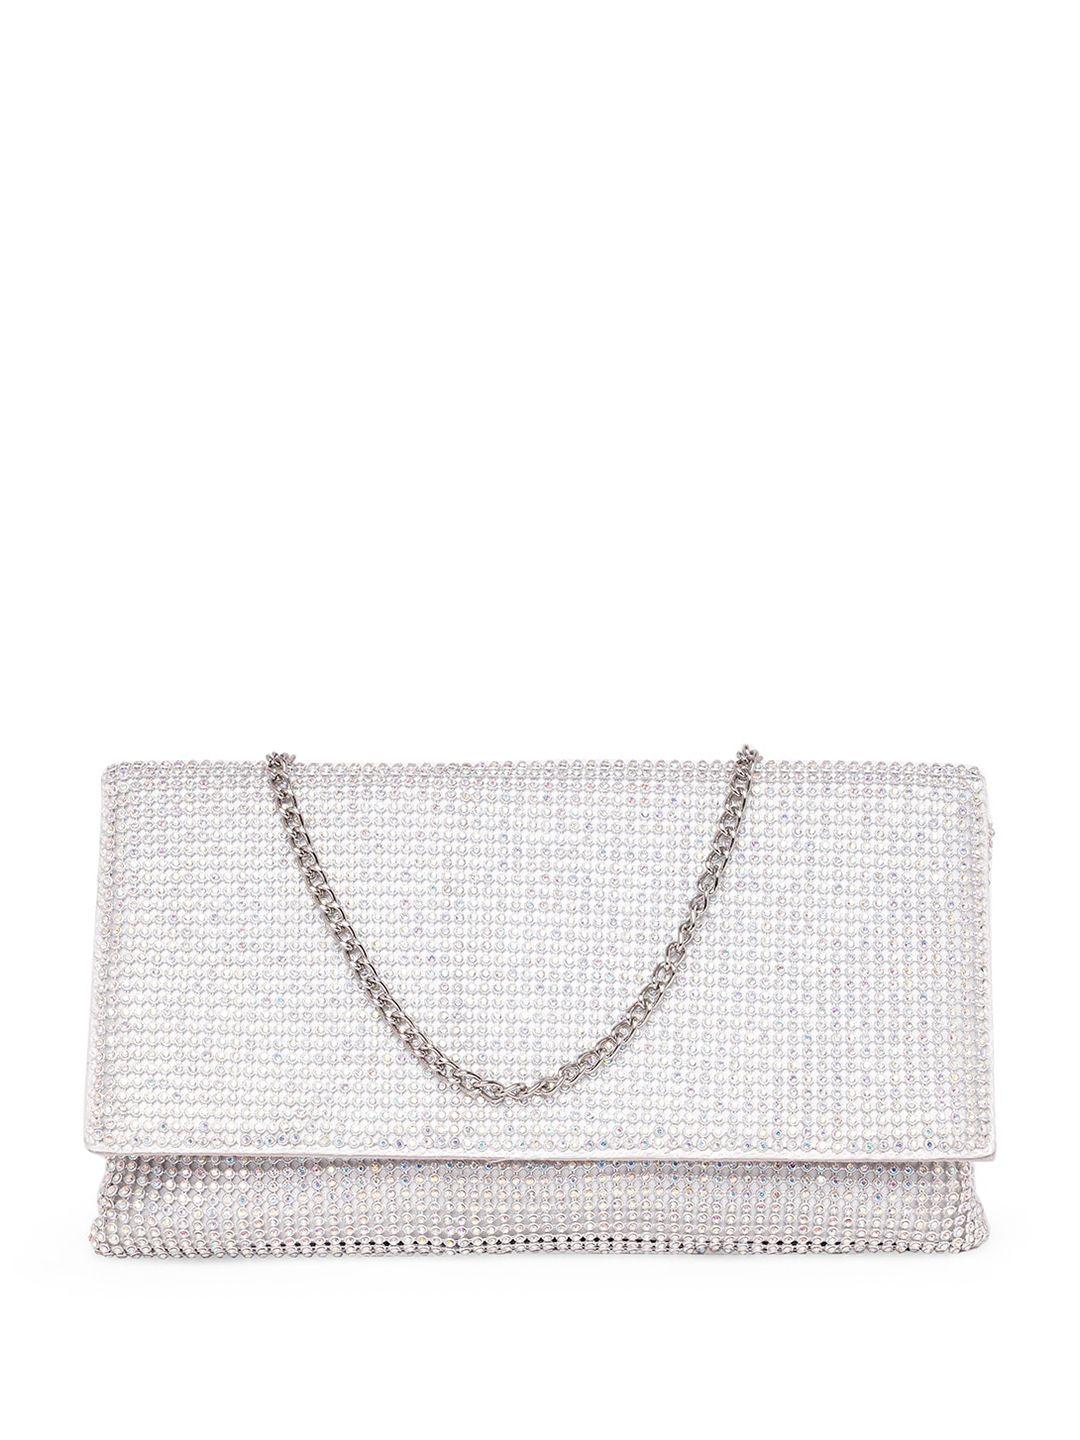 aldo embroidered purse clutch with shoulder strap